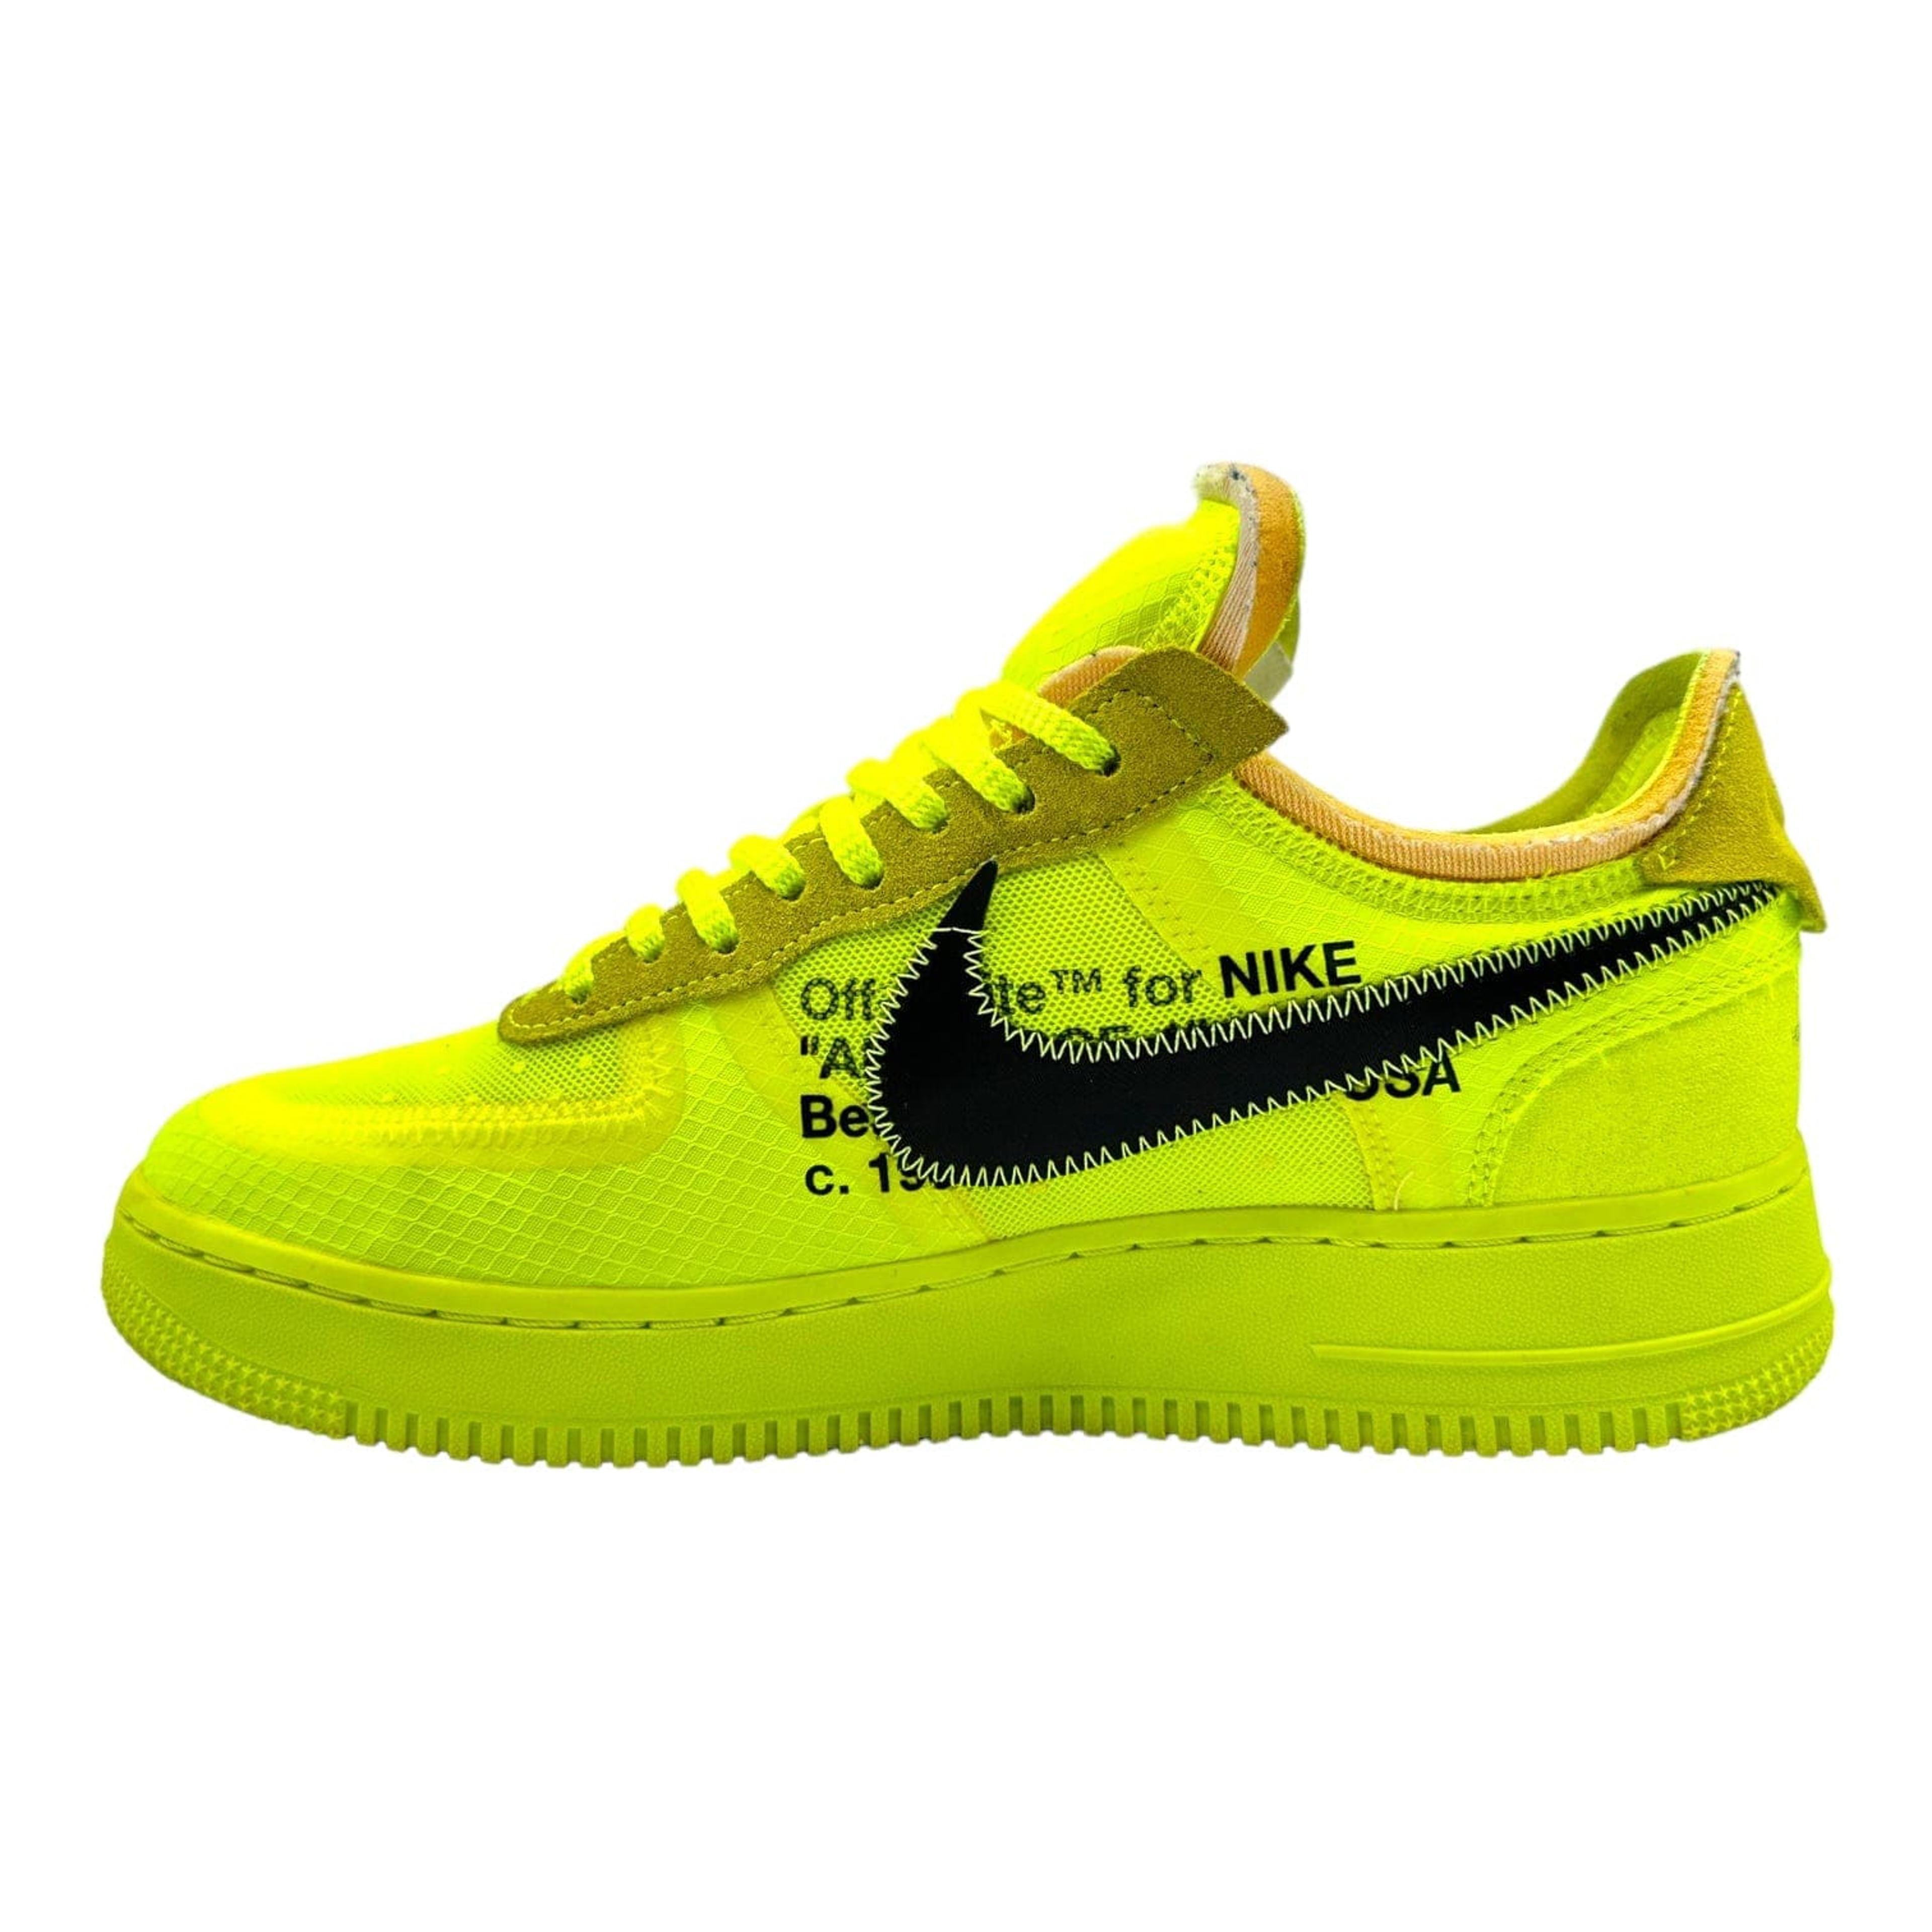 Alternate View 2 of Nike Air Force 1 Low Off-White Volt Pre-Owned